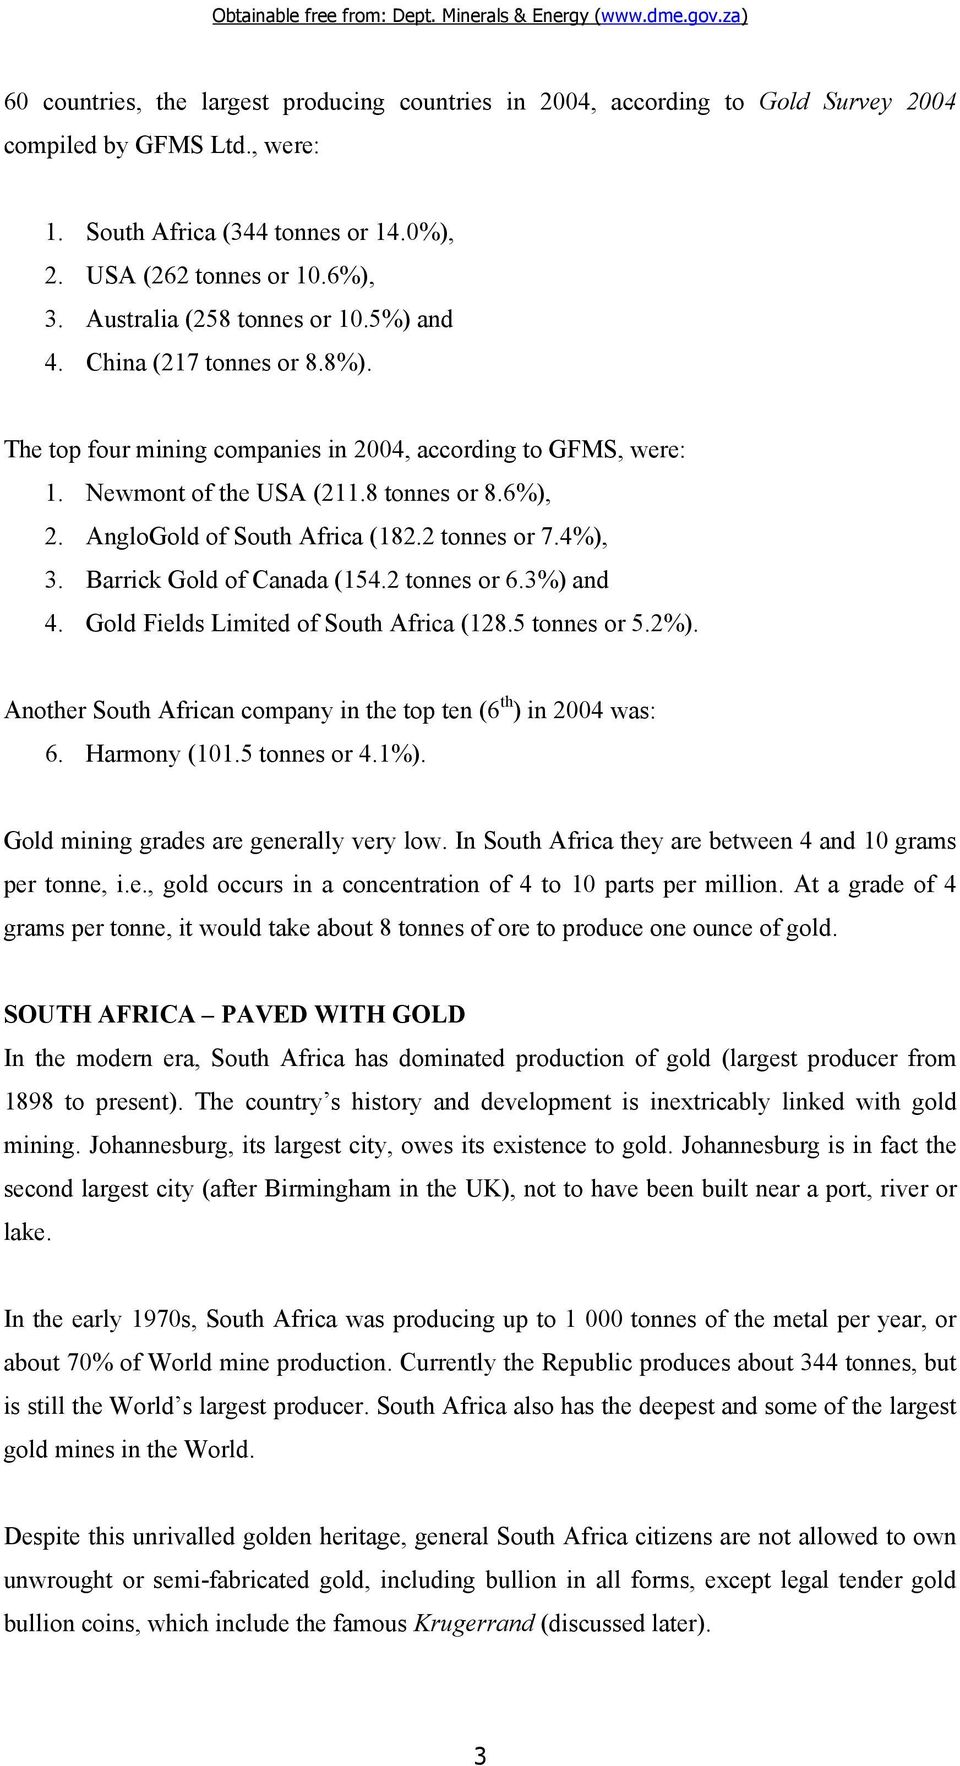 AngloGold of South Africa (182.2 tonnes or 7.4%), 3. Barrick Gold of Canada (154.2 tonnes or 6.3%) and 4. Gold Fields Limited of South Africa (128.5 tonnes or 5.2%).